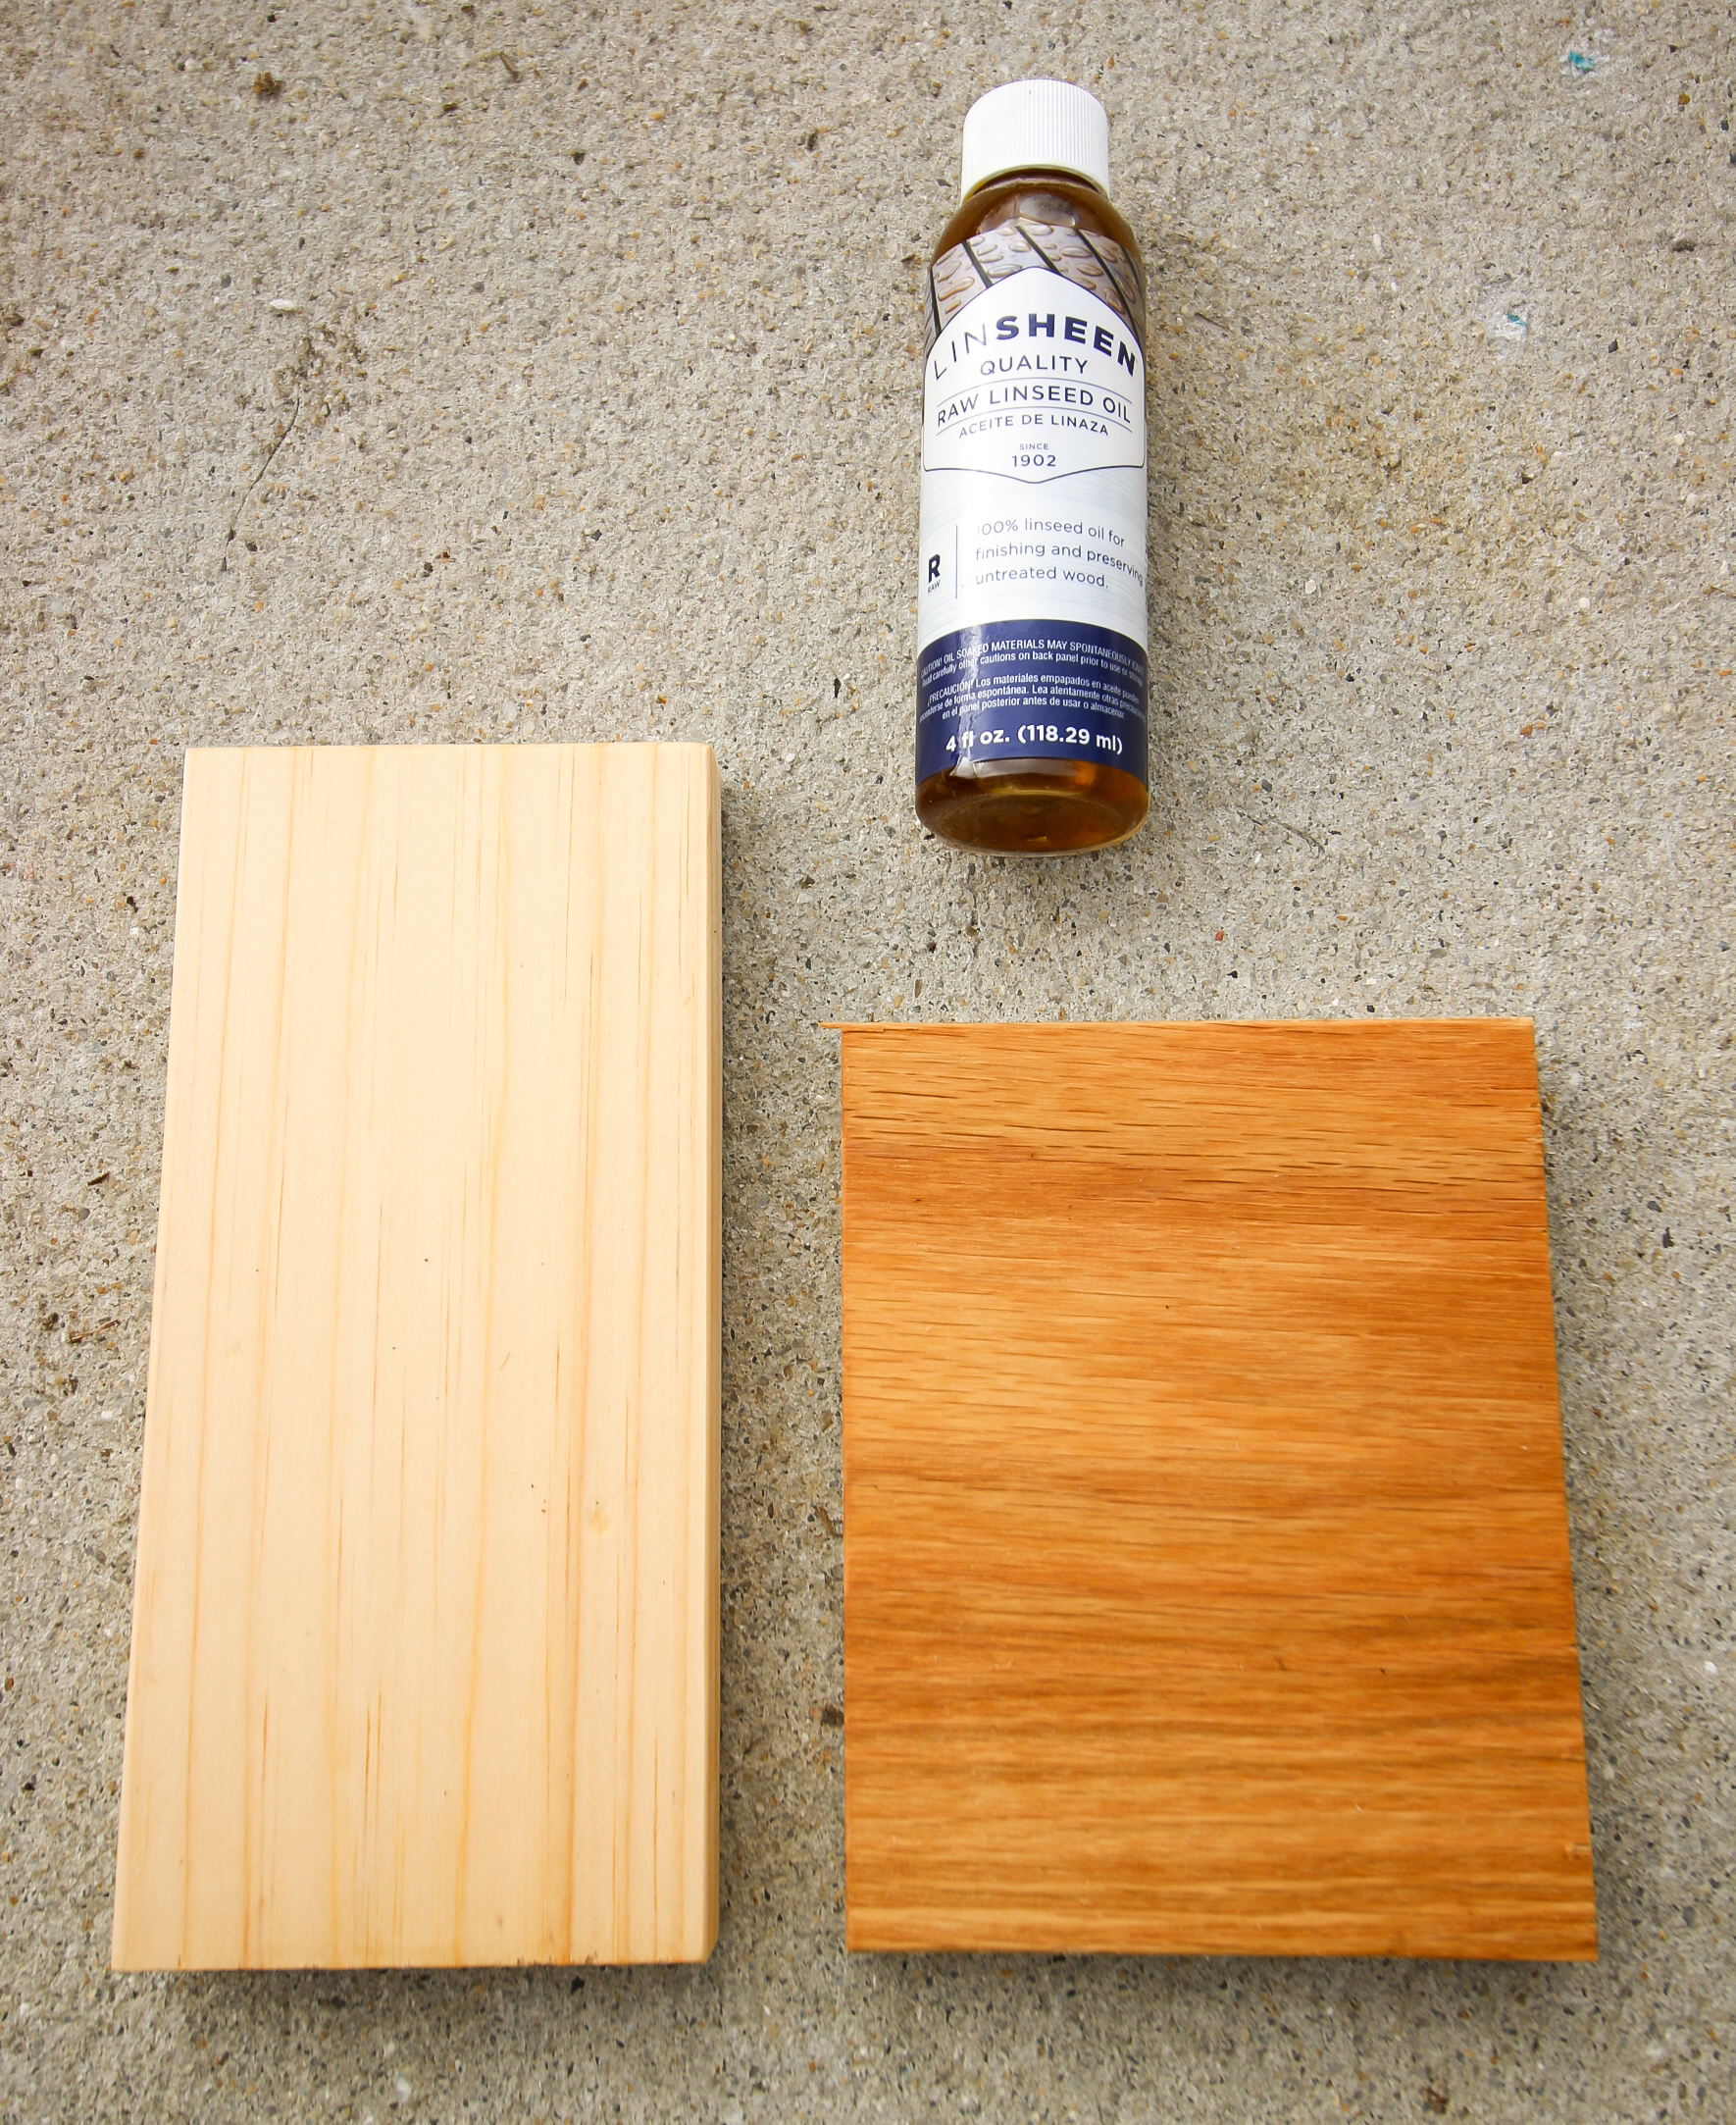 SPECIAL LINSEED OIL